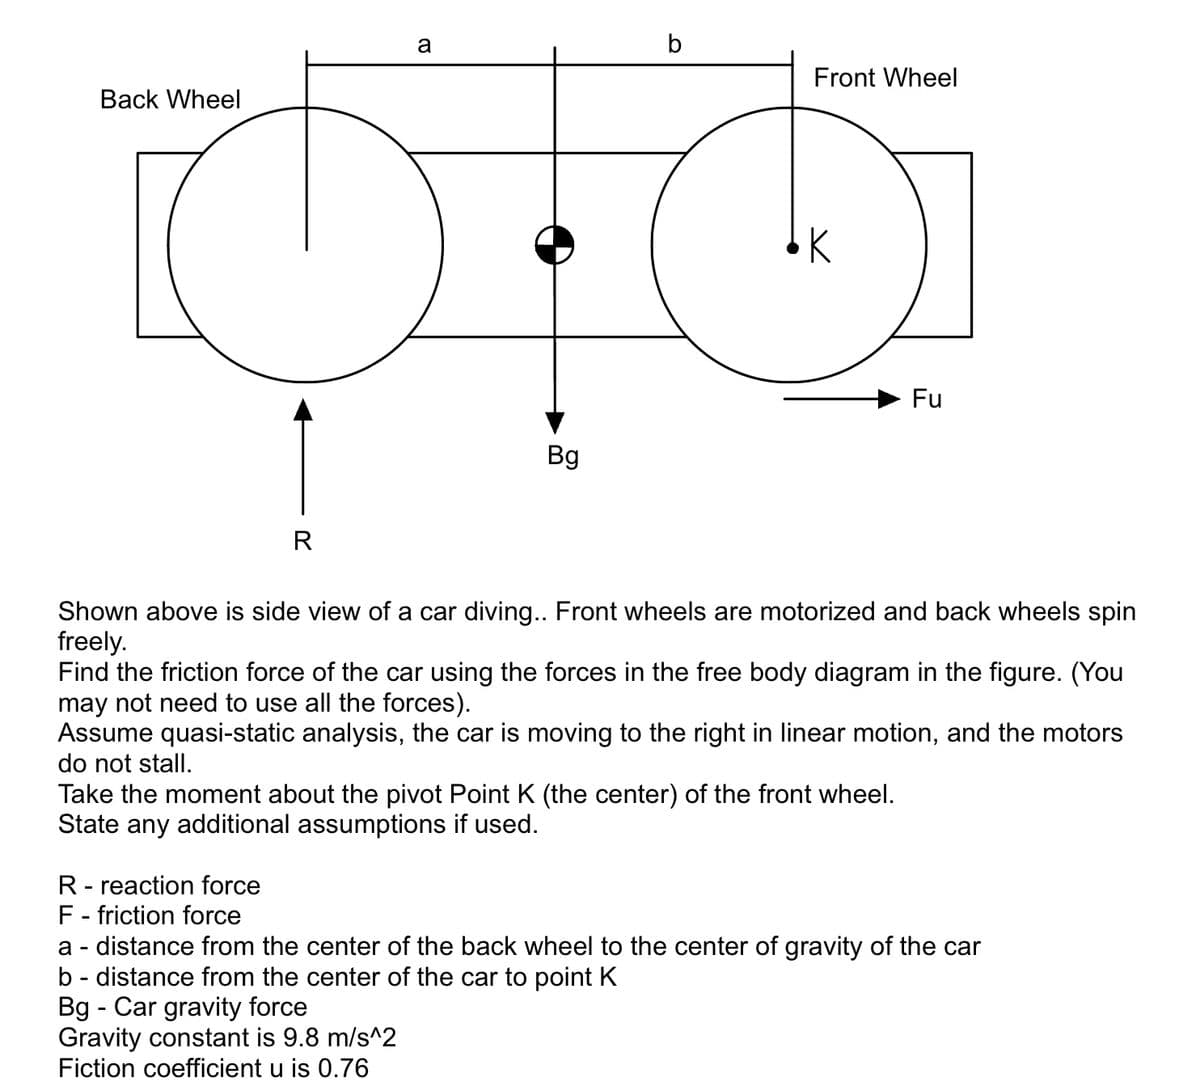 Back Wheel
R
a
Bg
b
Front Wheel
K
Fu
Shown above is side view of a car diving.. Front wheels are motorized and back wheels spin
freely.
Find the friction force of the car using the forces in the free body diagram in the figure. (You
may not need to use all the forces).
Assume quasi-static analysis, the car is moving to the right in linear motion, and the motors
do not stall.
Take the moment about the pivot Point K (the center) of the front wheel.
State any additional assumptions if used.
R- reaction force
F - friction force
a - distance from the center of the back wheel to the center of gravity of the car
b- distance from the center of the car to point K
Bg - Car gravity force
Gravity constant is 9.8 m/s^2
Fiction coefficient u is 0.76